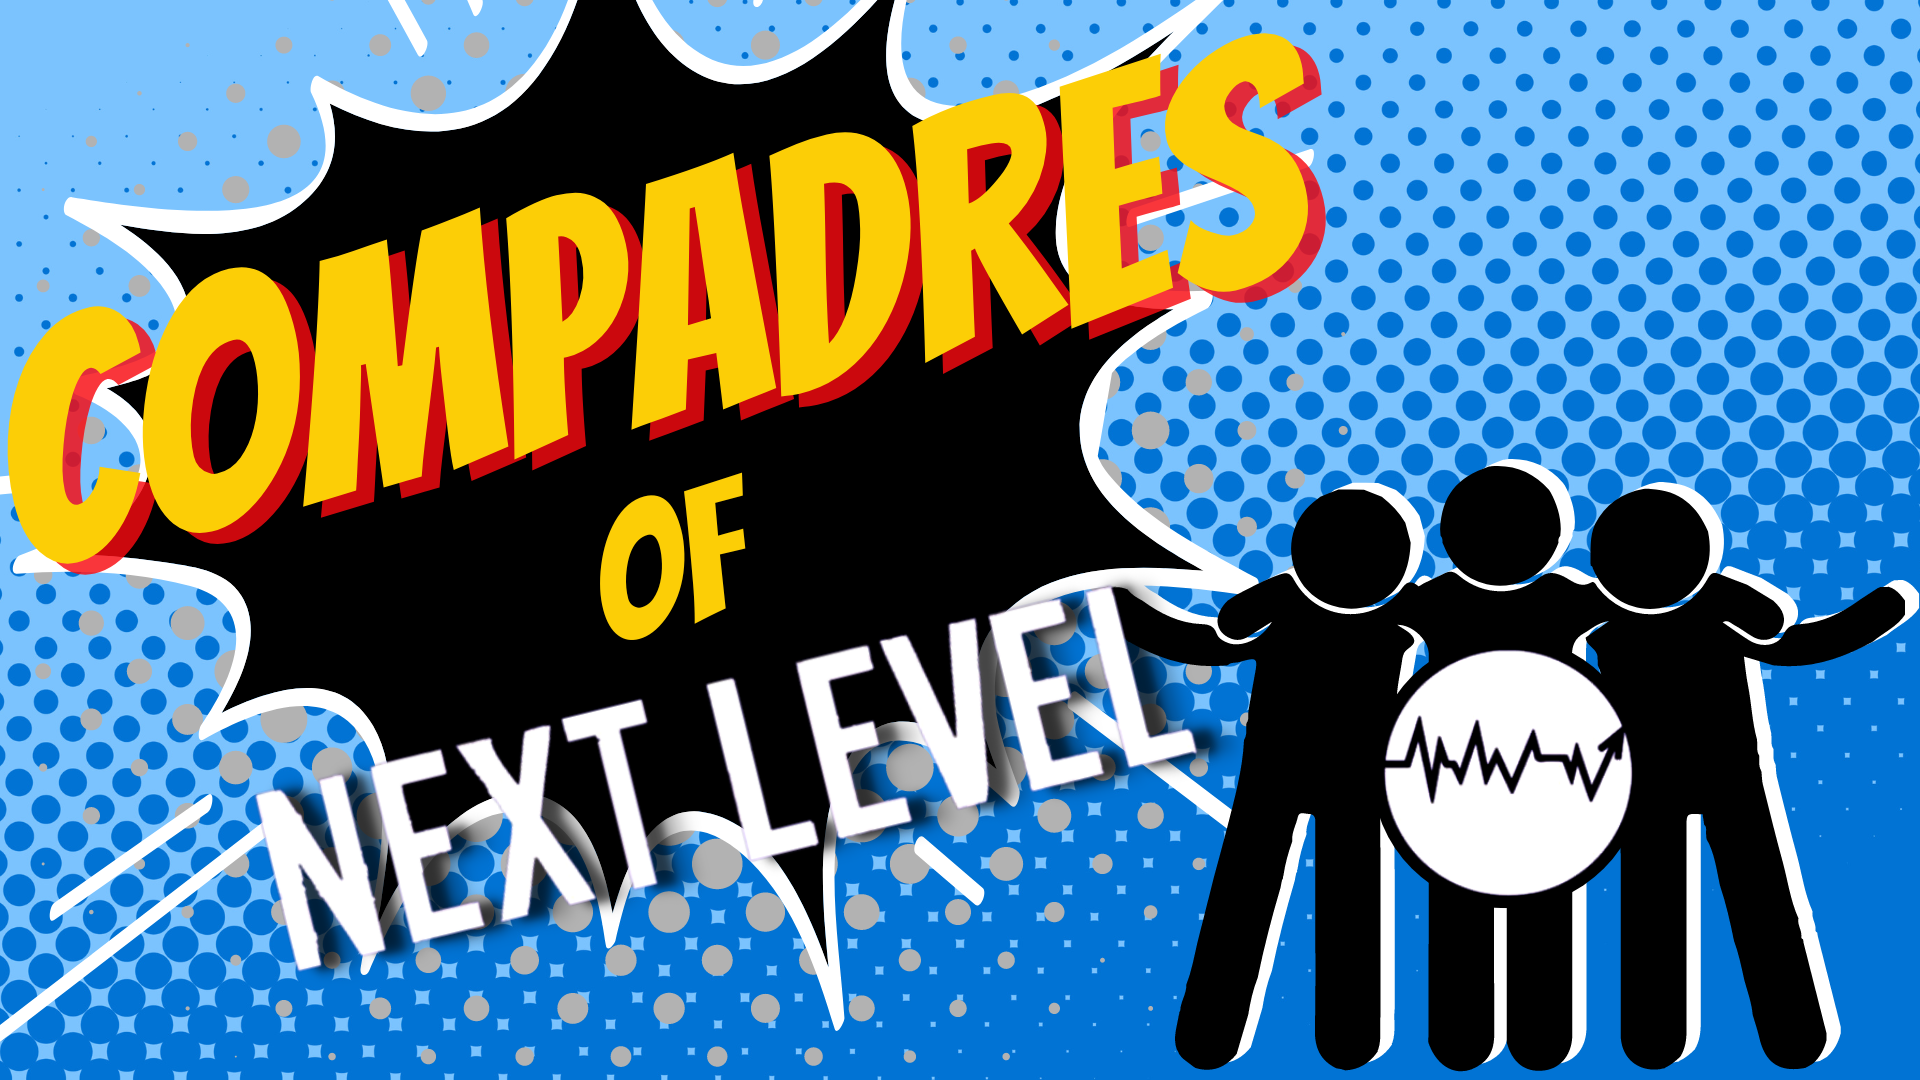 Compadres of Next Level, Week 4